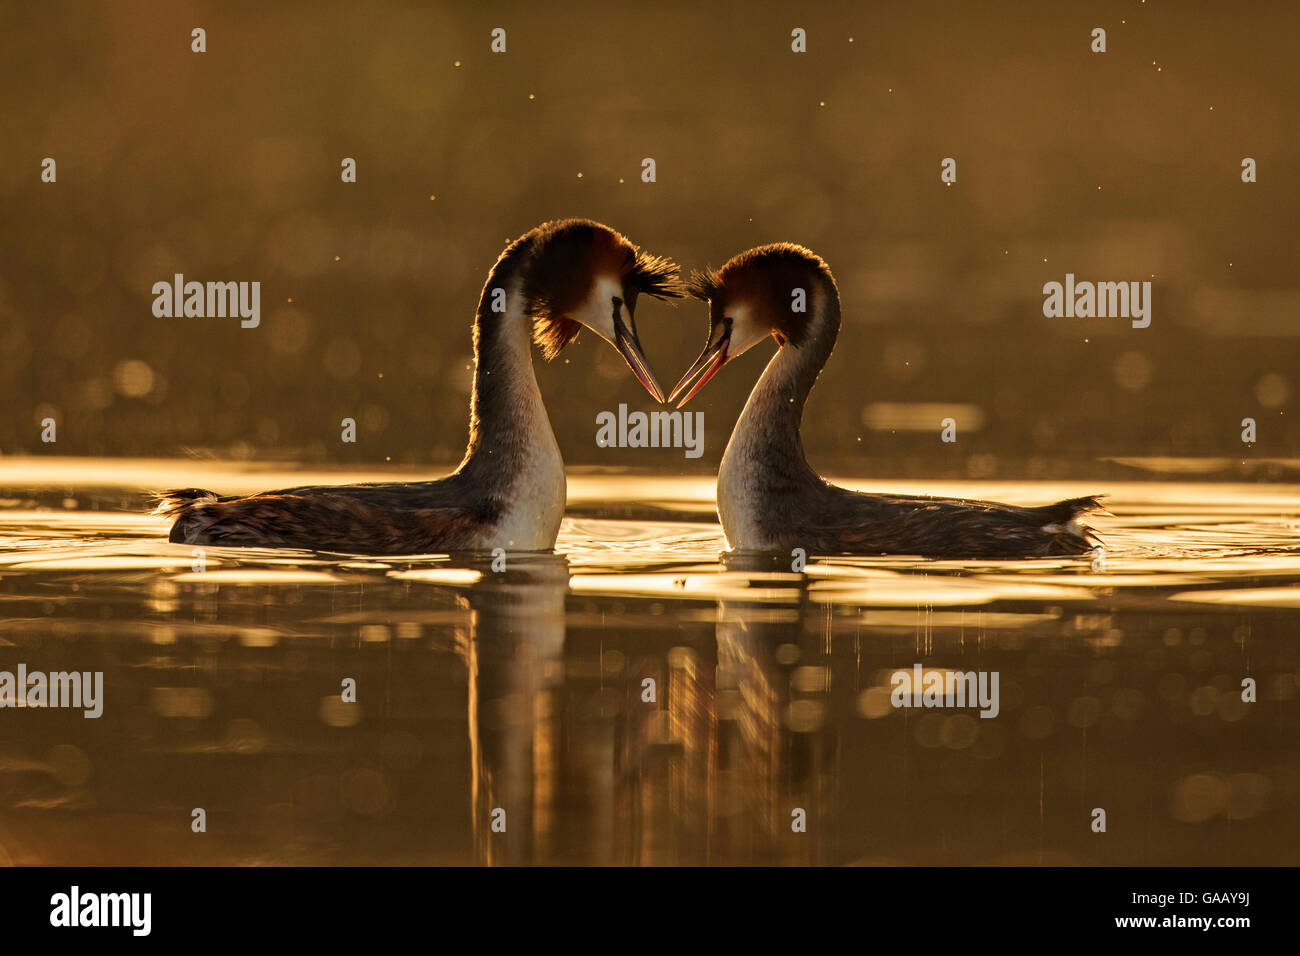 Great crested grebe (Podiceps cristatus cristatus) courtship dance at dawn, Cardiff, UK, March. Great crested grebe (Podiceps cristatus cristatus) courtship dance at dawn, Cardiff, UK, March. Highly Commended in the Animal Behaviour Category of the BWPA Competition 2015. Stock Photo